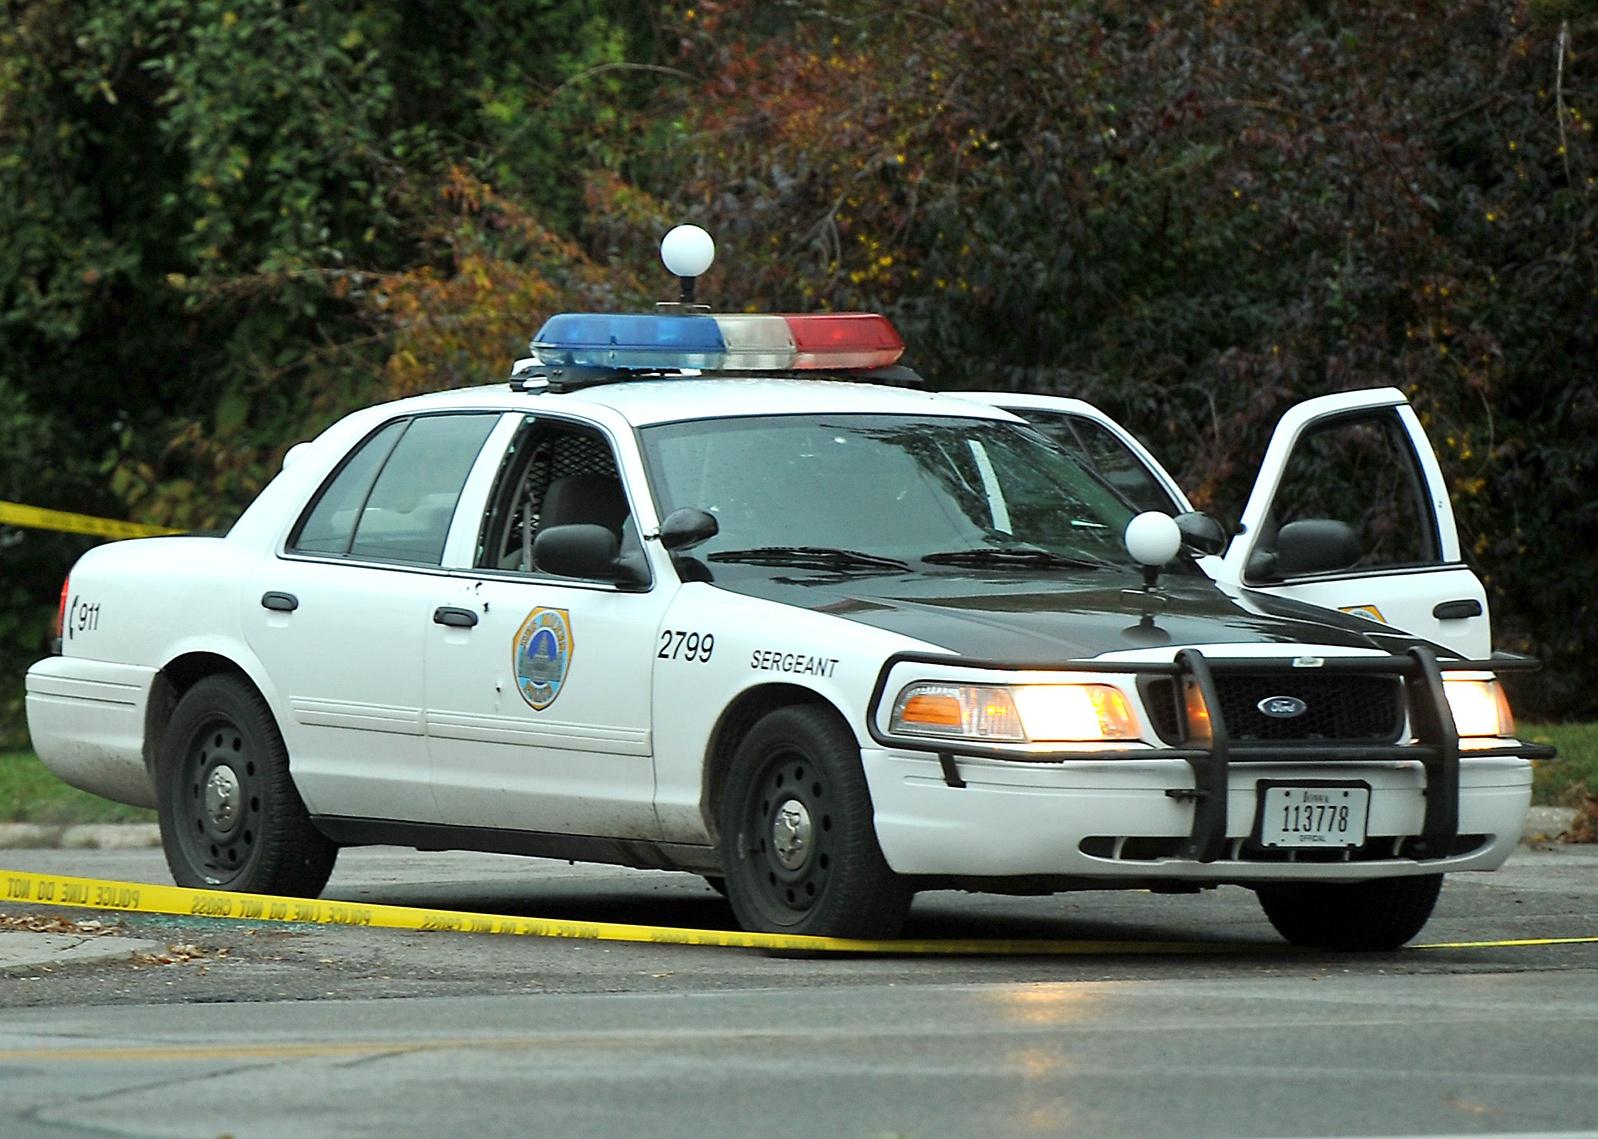 A police car with a broken window sits at a crime scene.